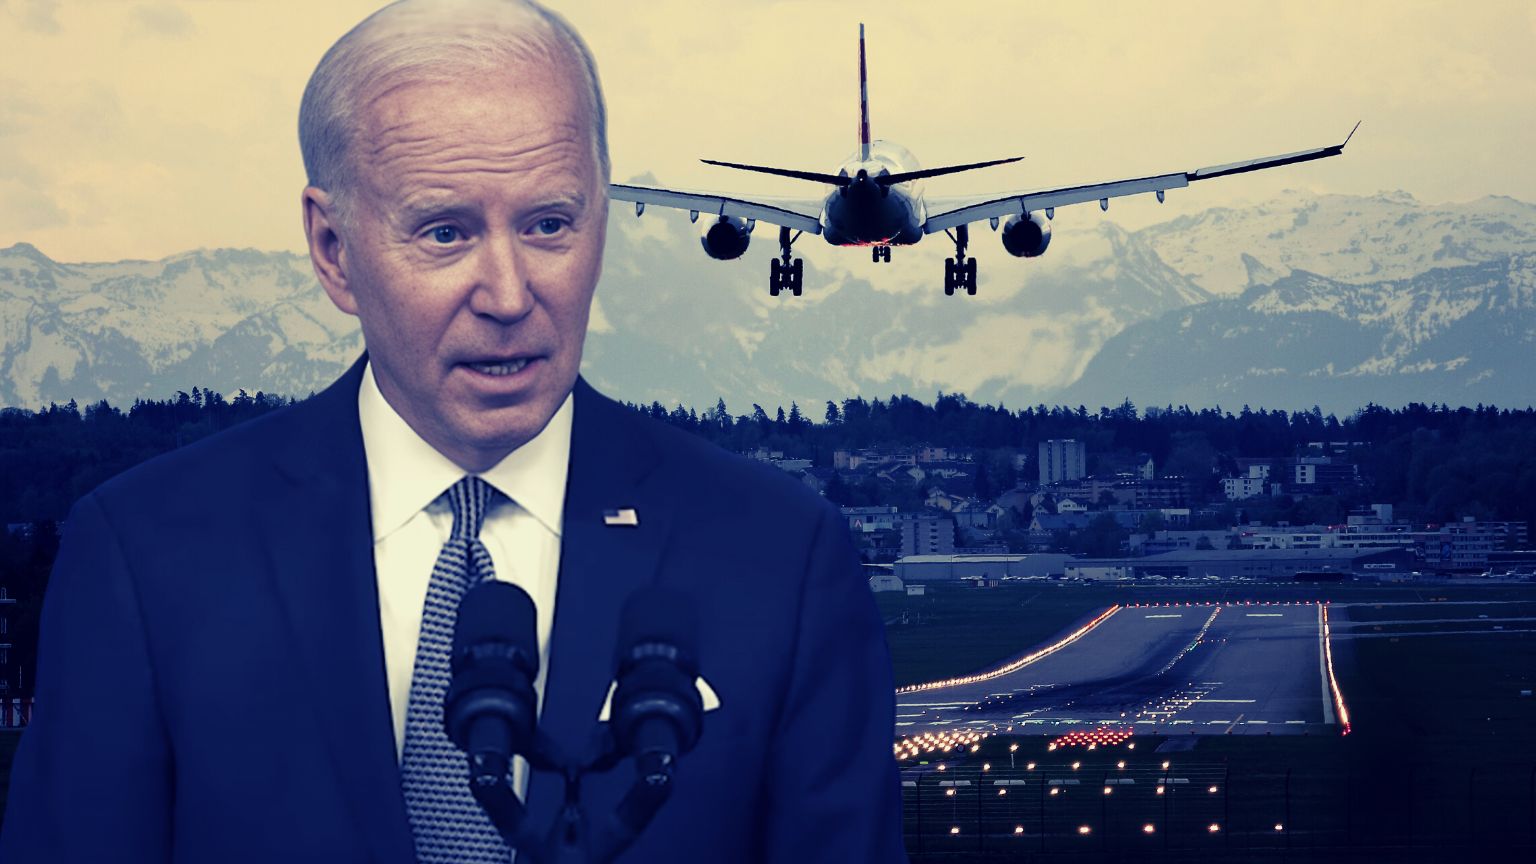 Biden administration gets pushback over airport face scans